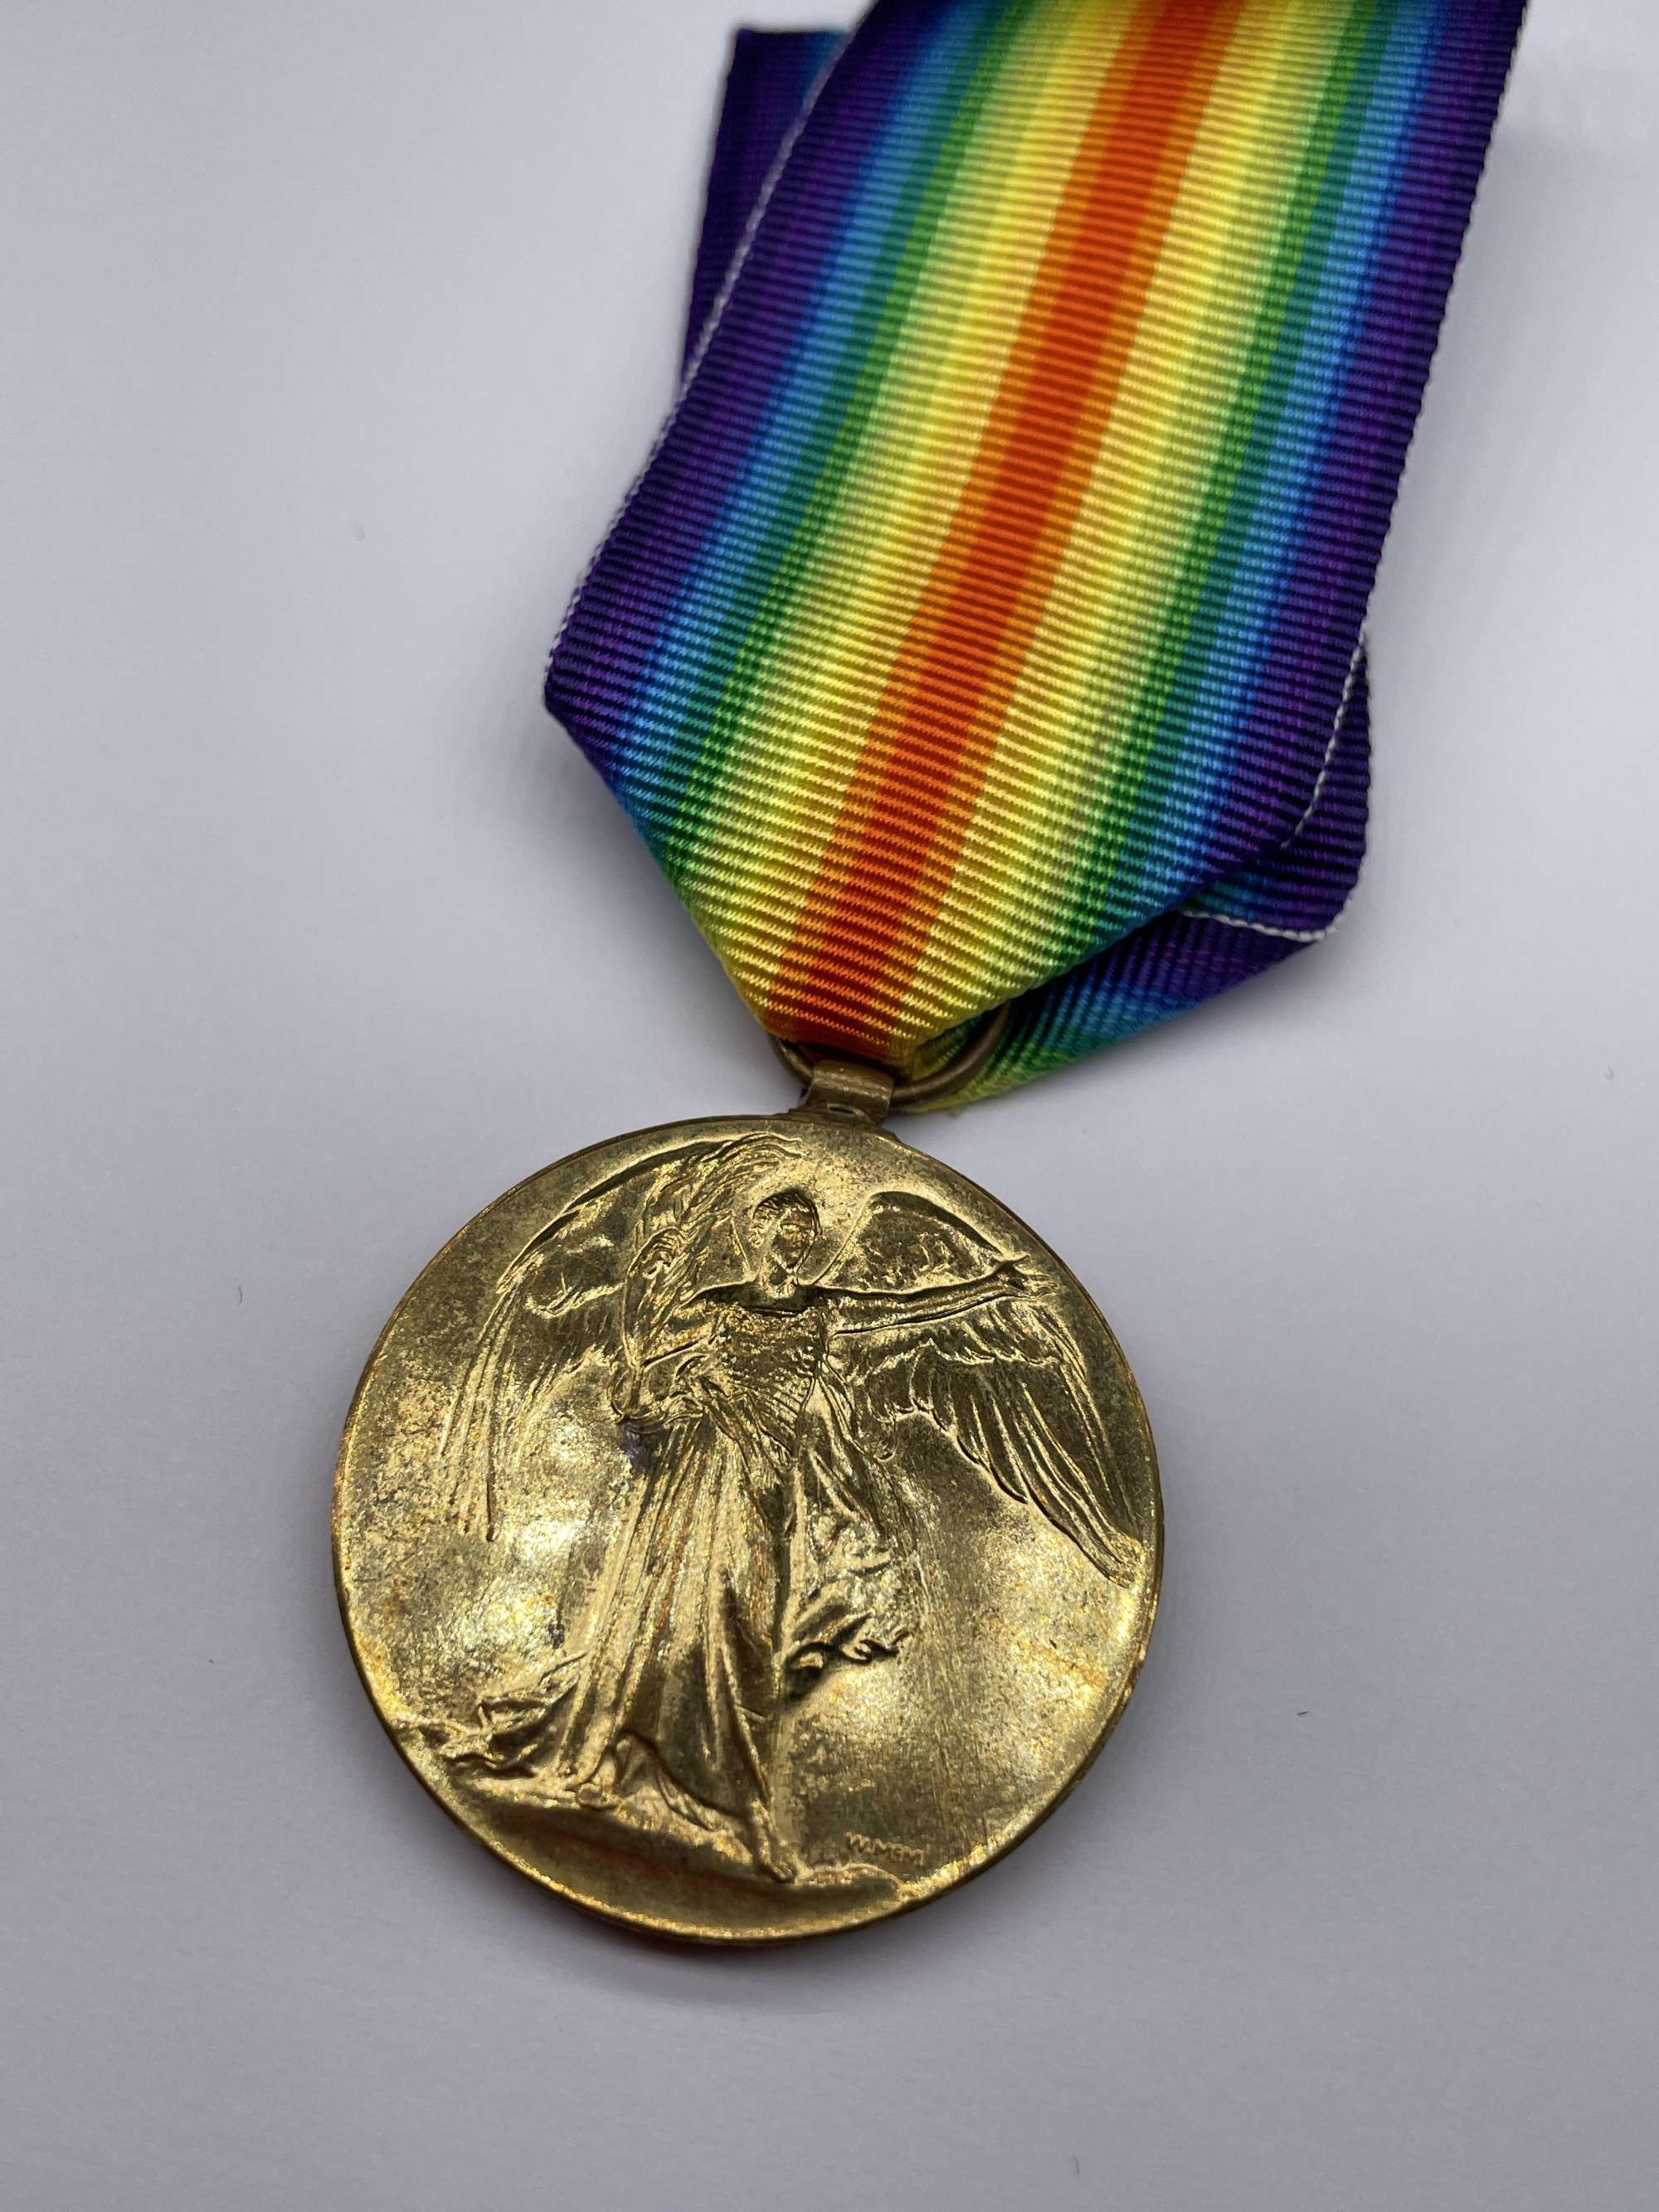 Original World War One Victory Medal, Pte Premont, 16th London and 17th/13th Gloucester R.